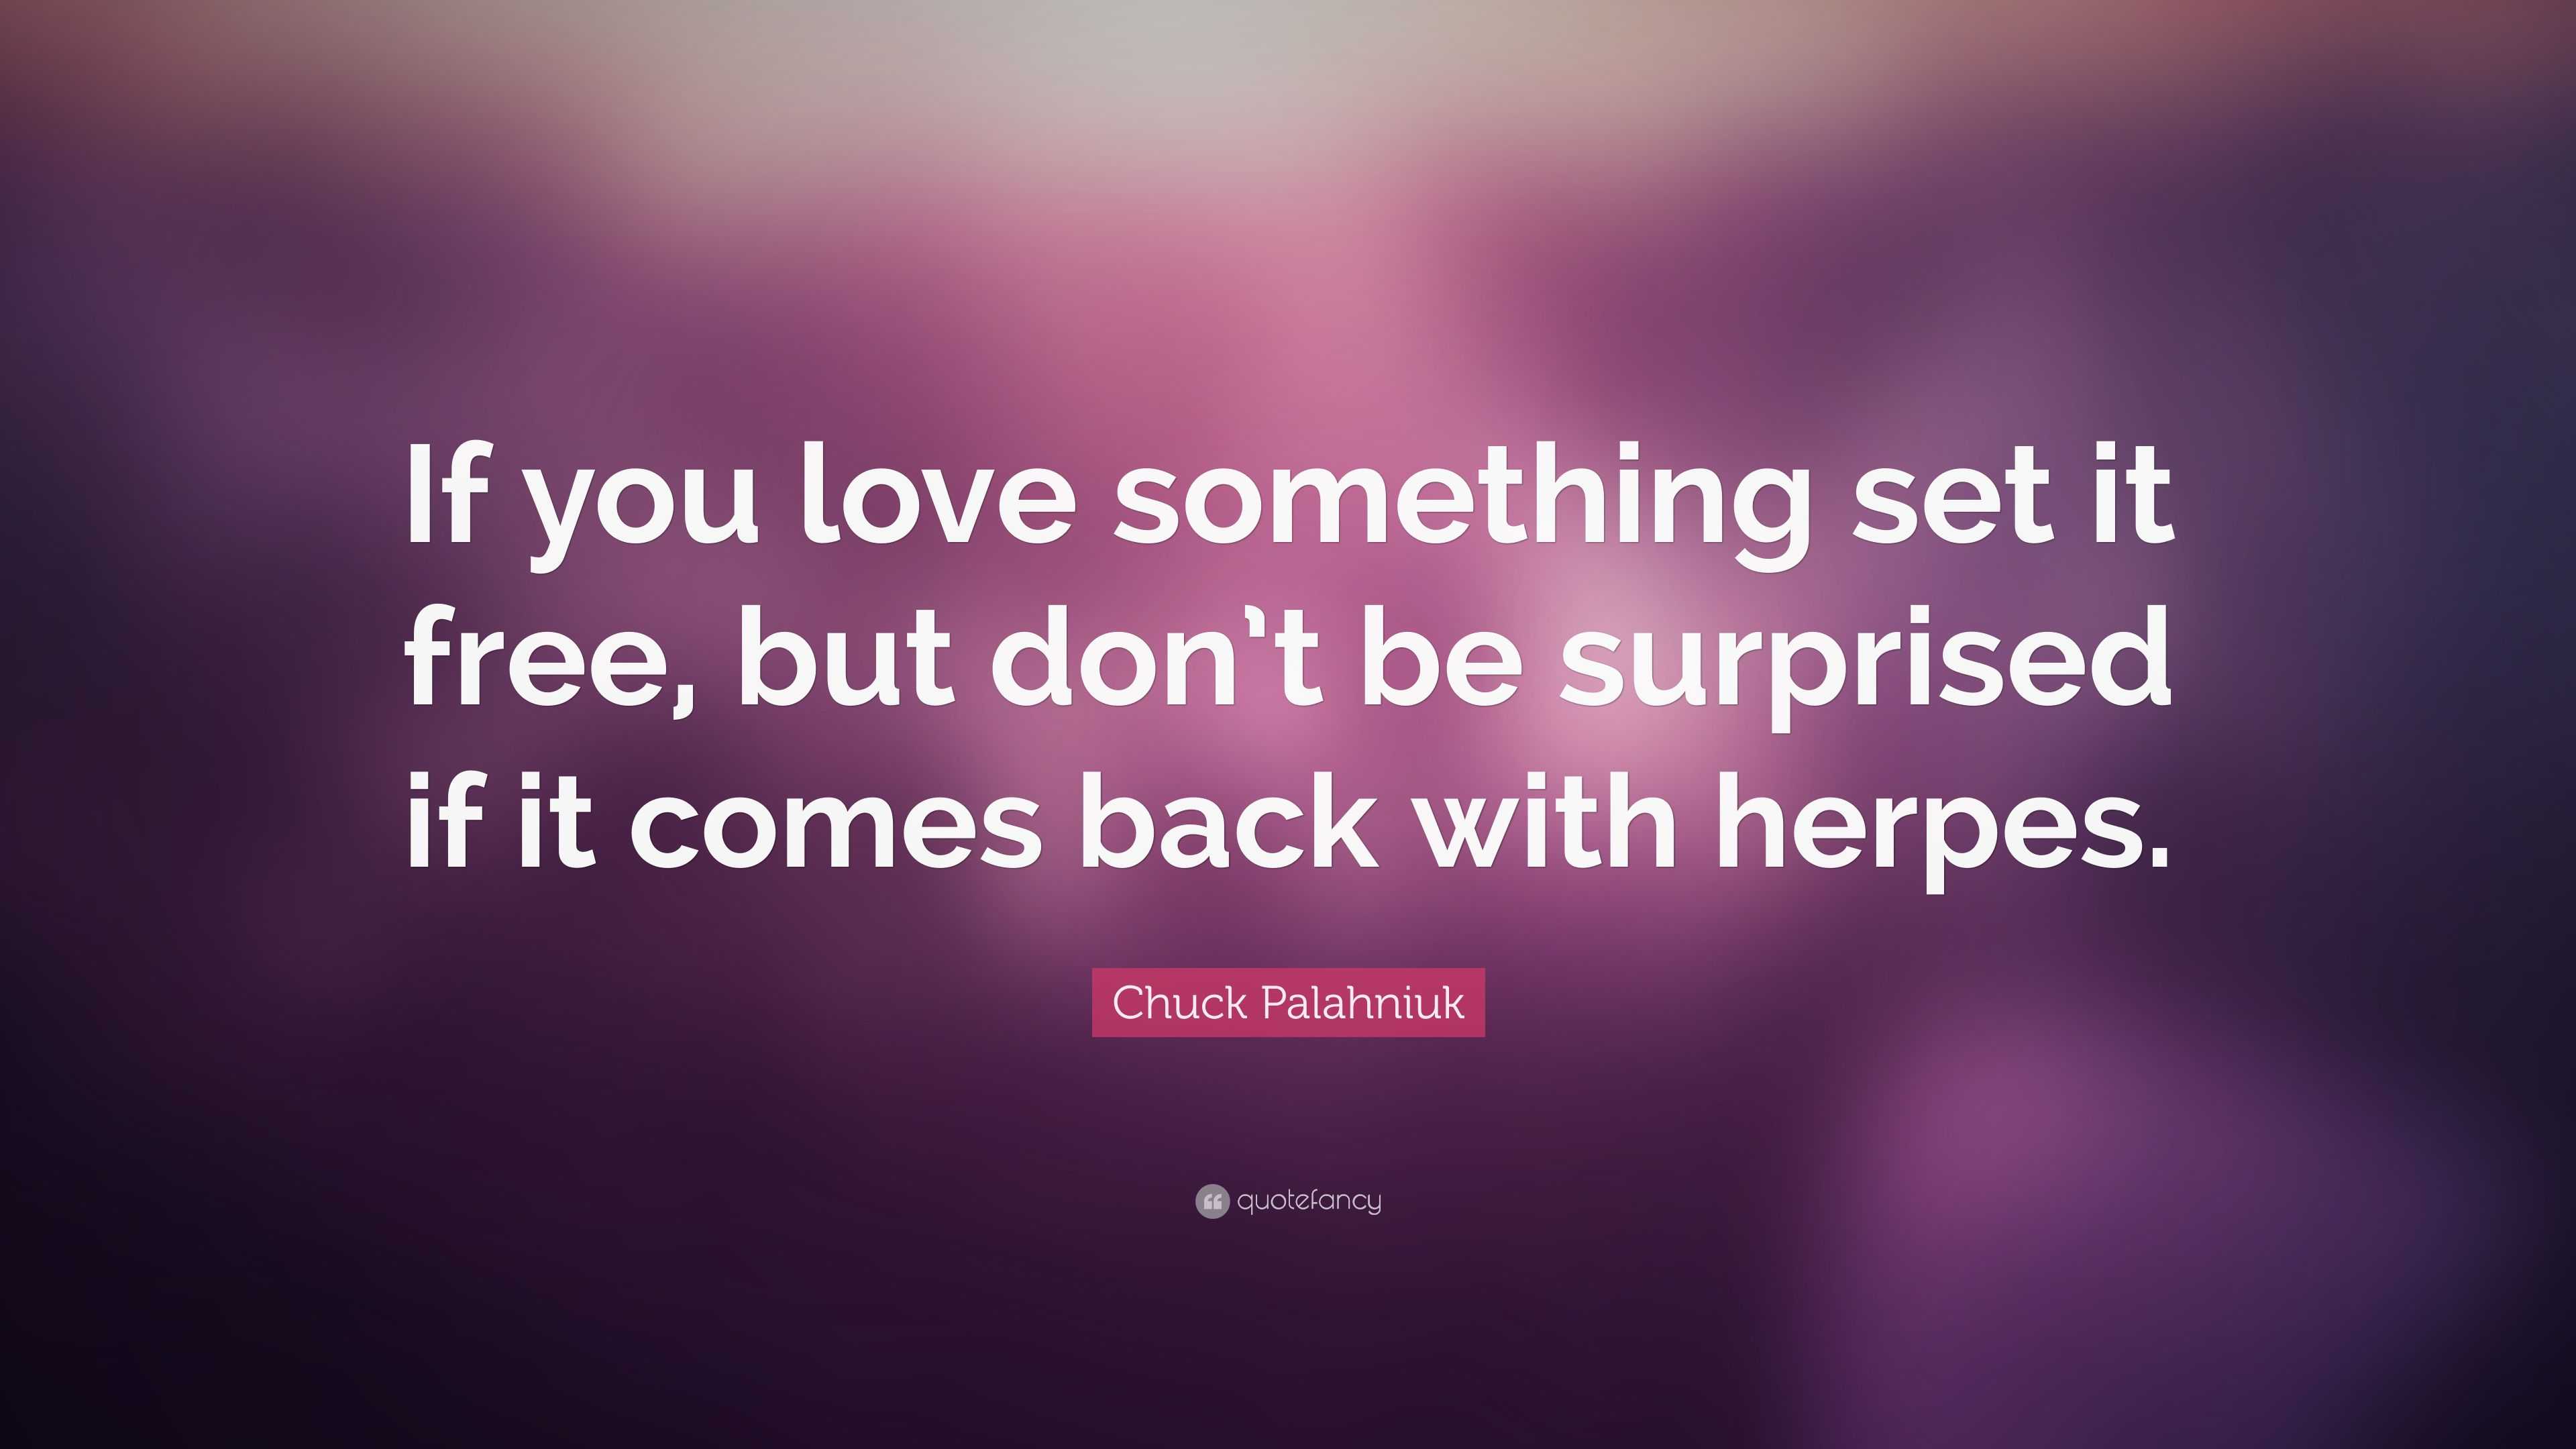 Chuck Palahniuk Quote “If you love something set it free but don